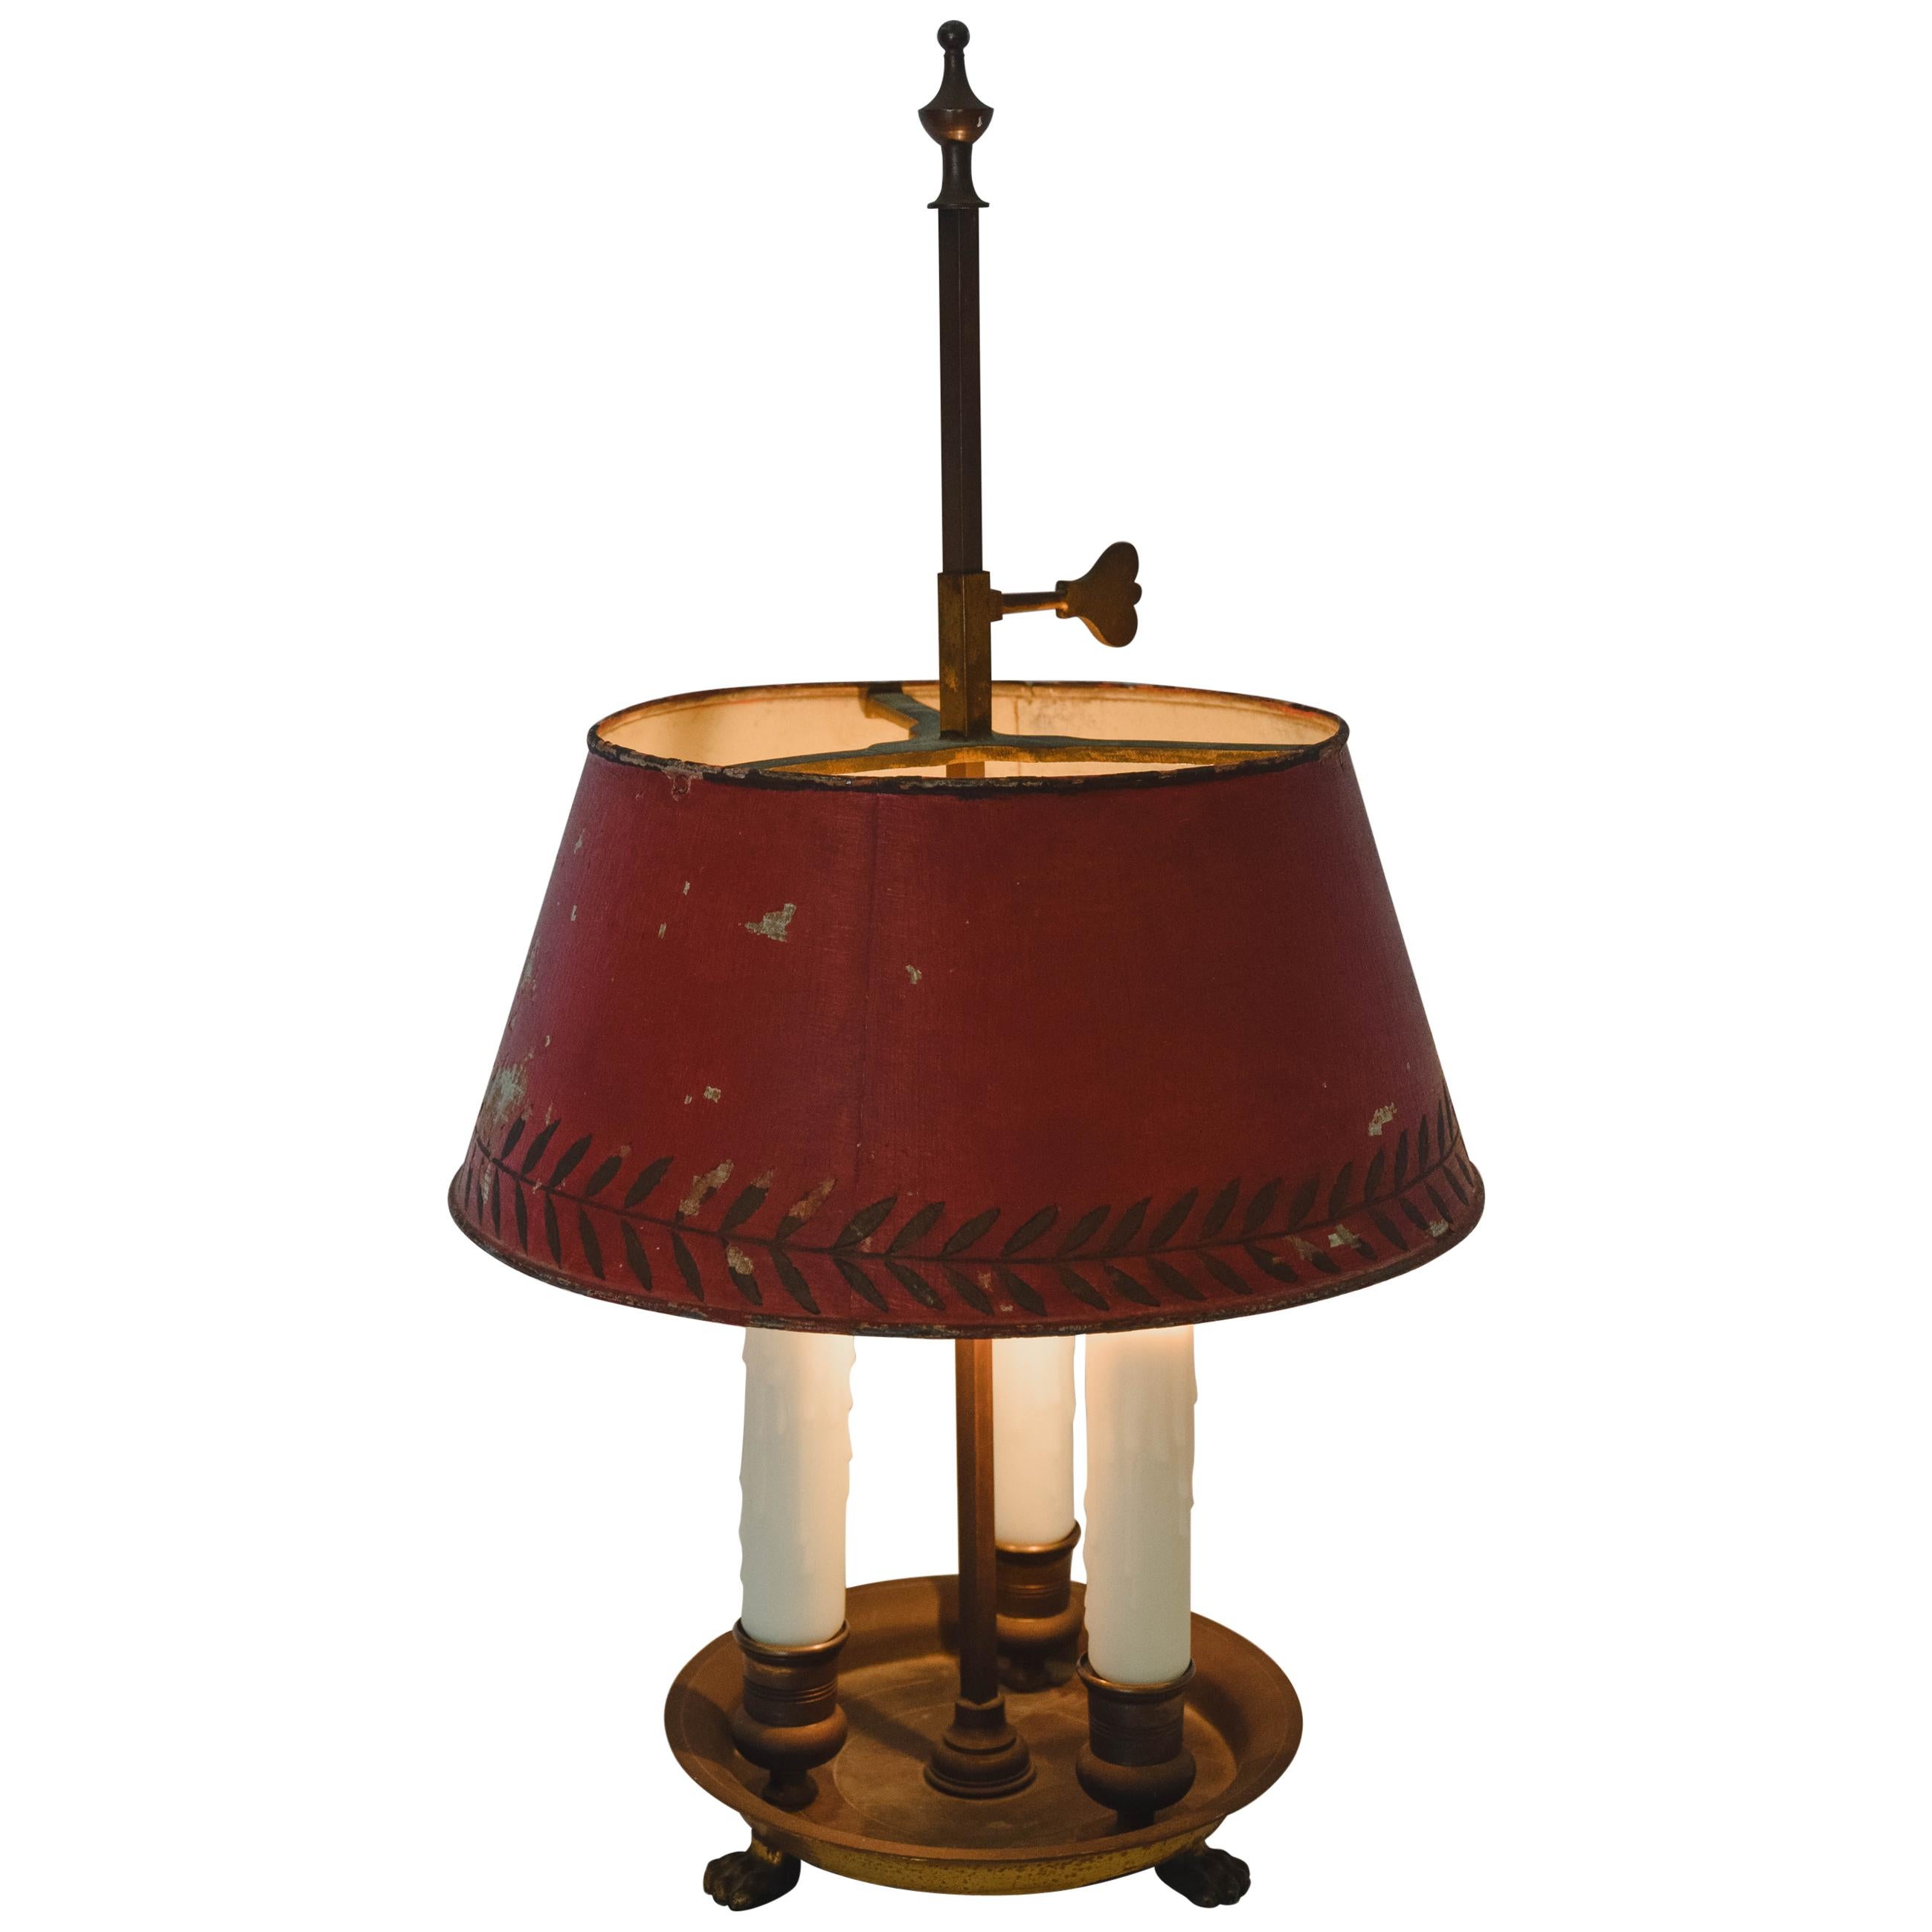 French Bouilotte Lamp